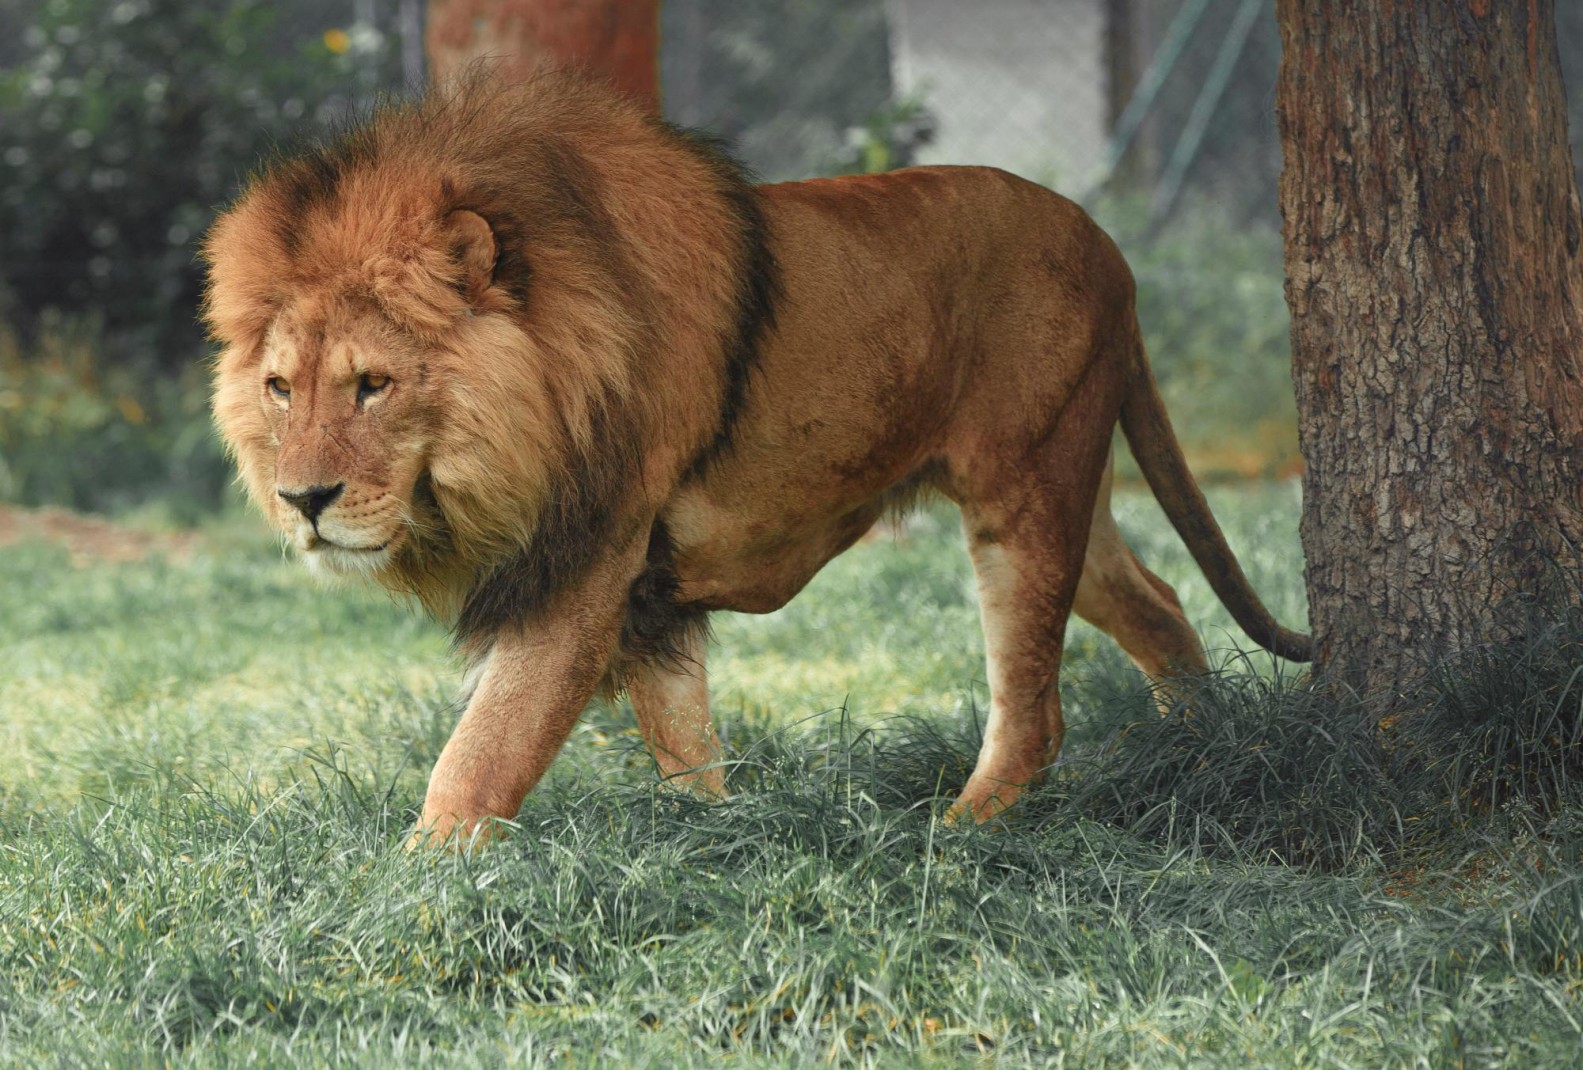 Male lion with long mane walking in grass on sunny day.